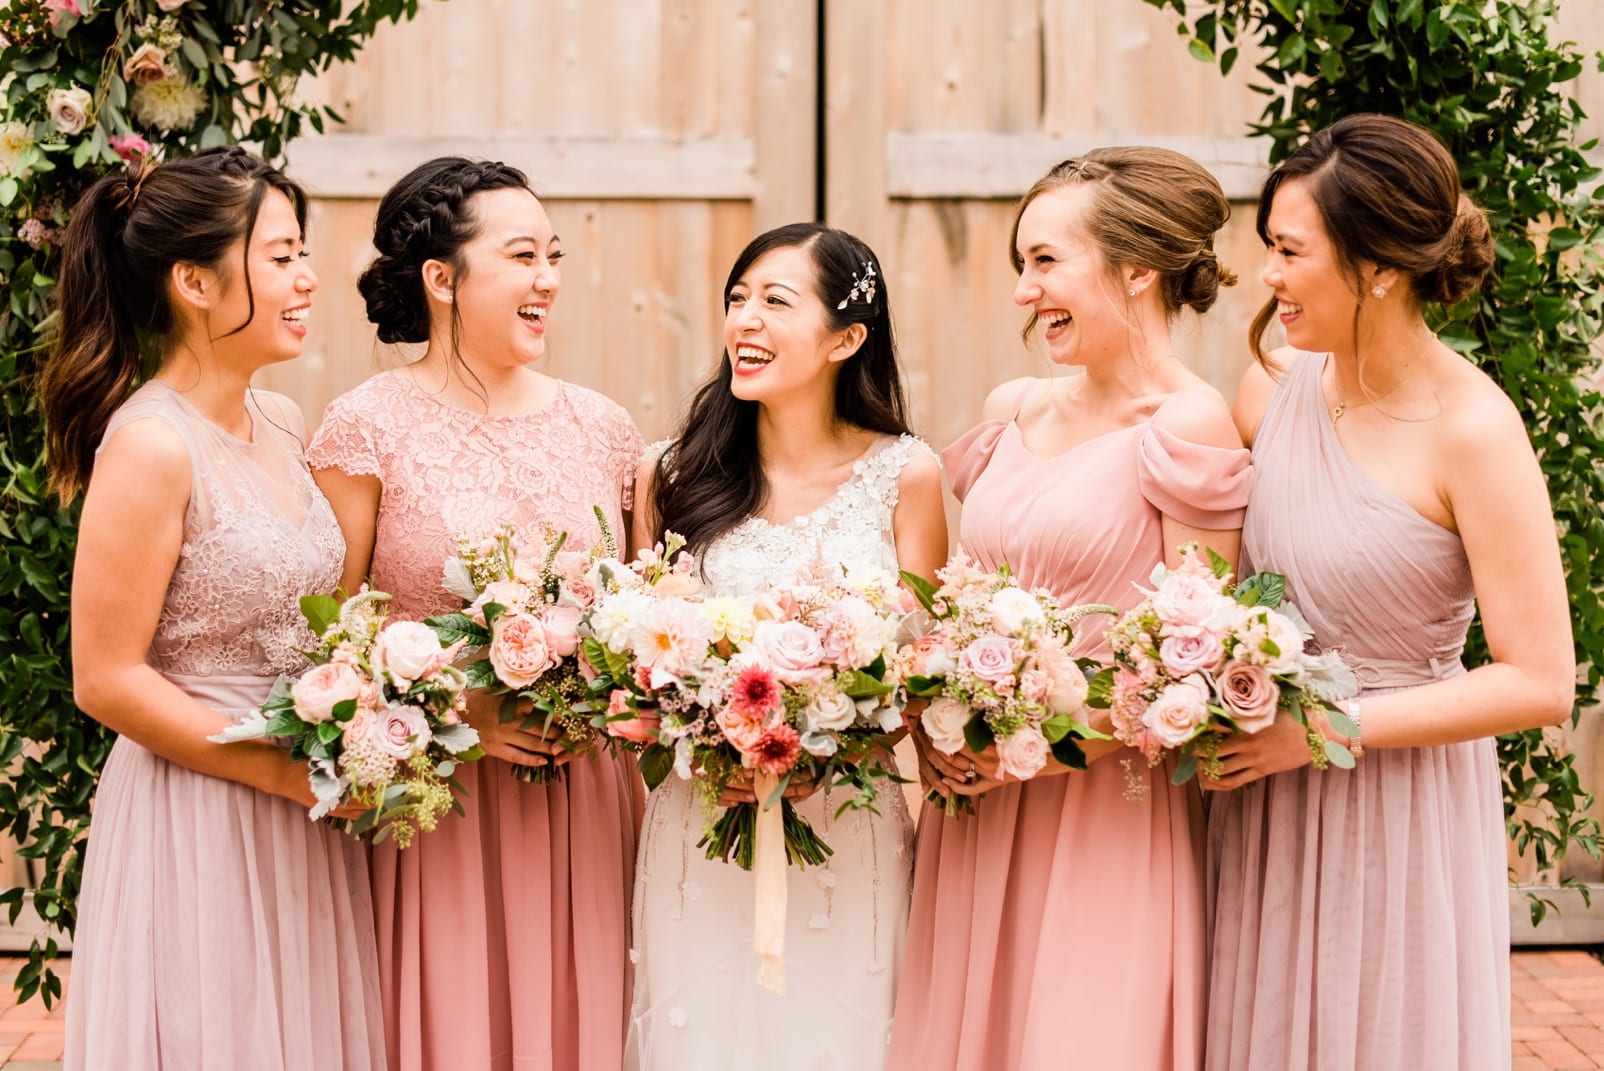 Bride laughing with bridesmaids in knee length light pink dresses photo